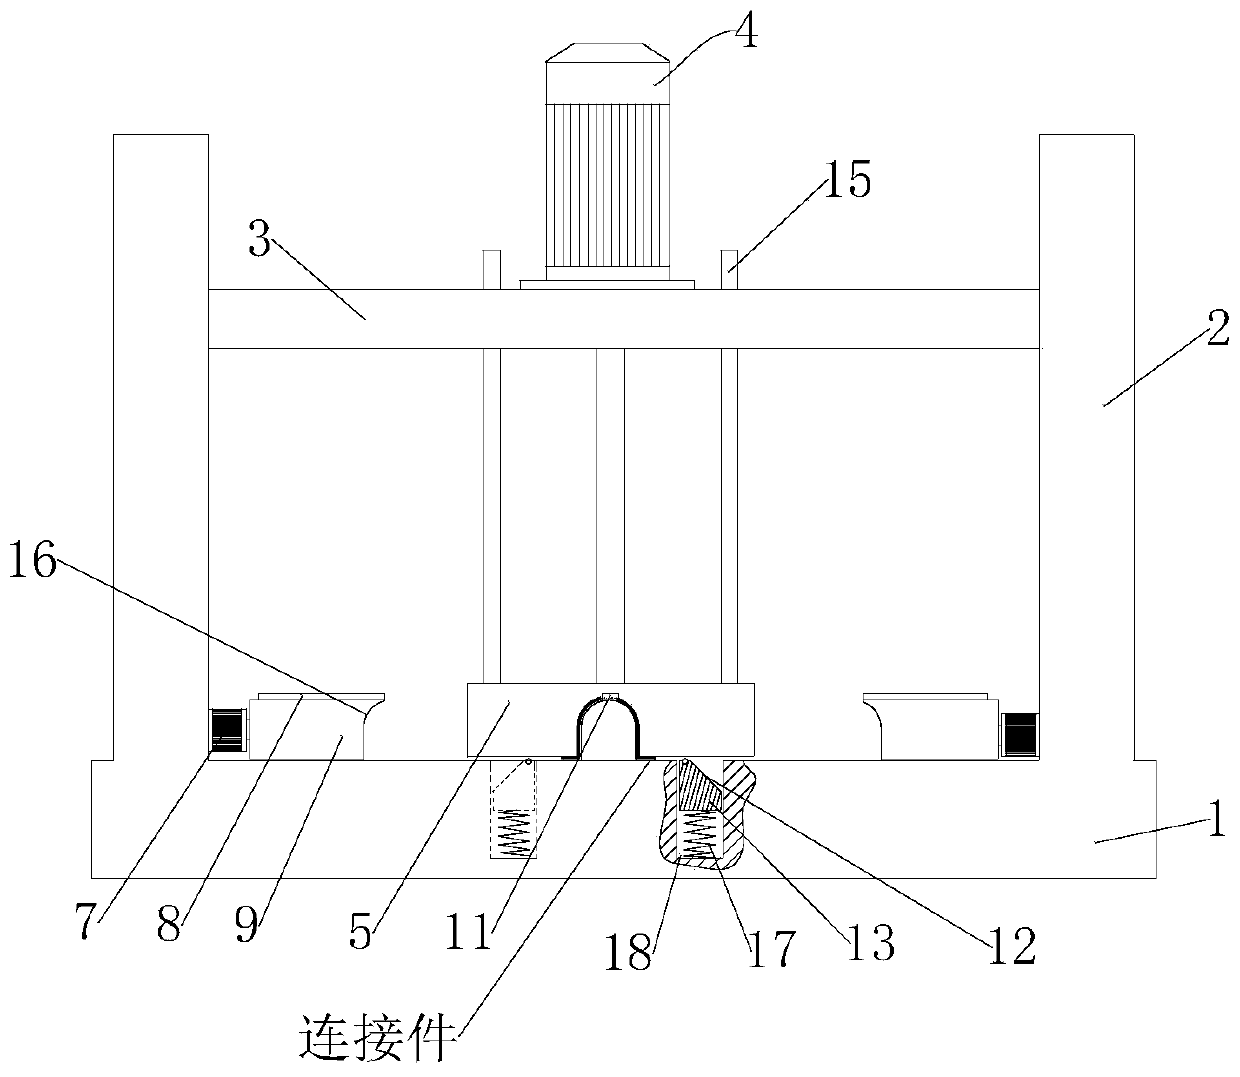 Graded punch forming method for automobile sheet metal connecting piece